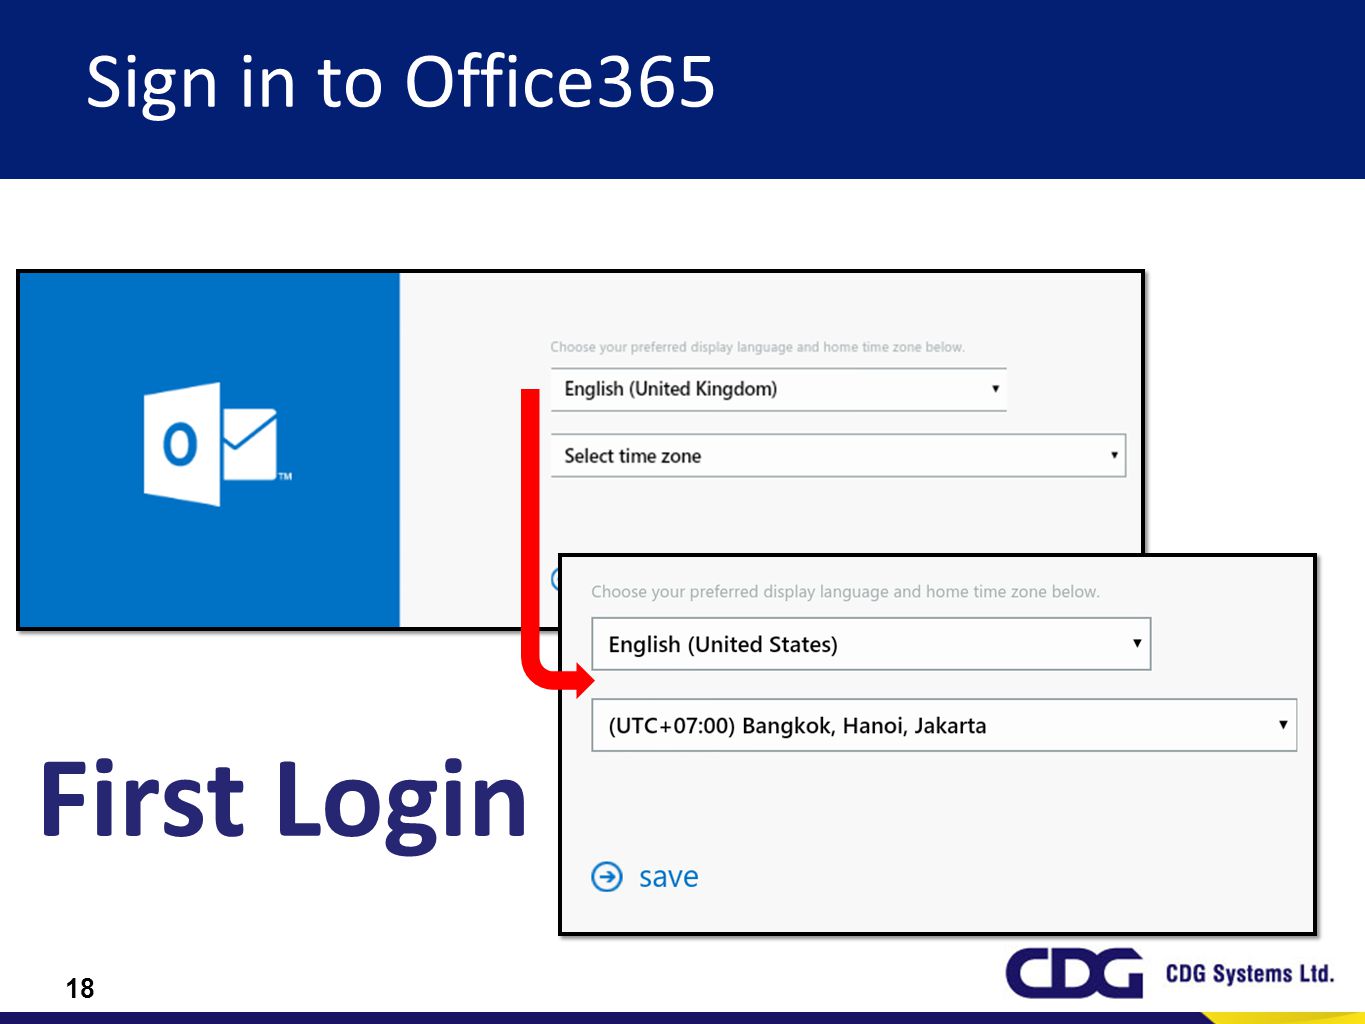 Sign in to Office365 First Login